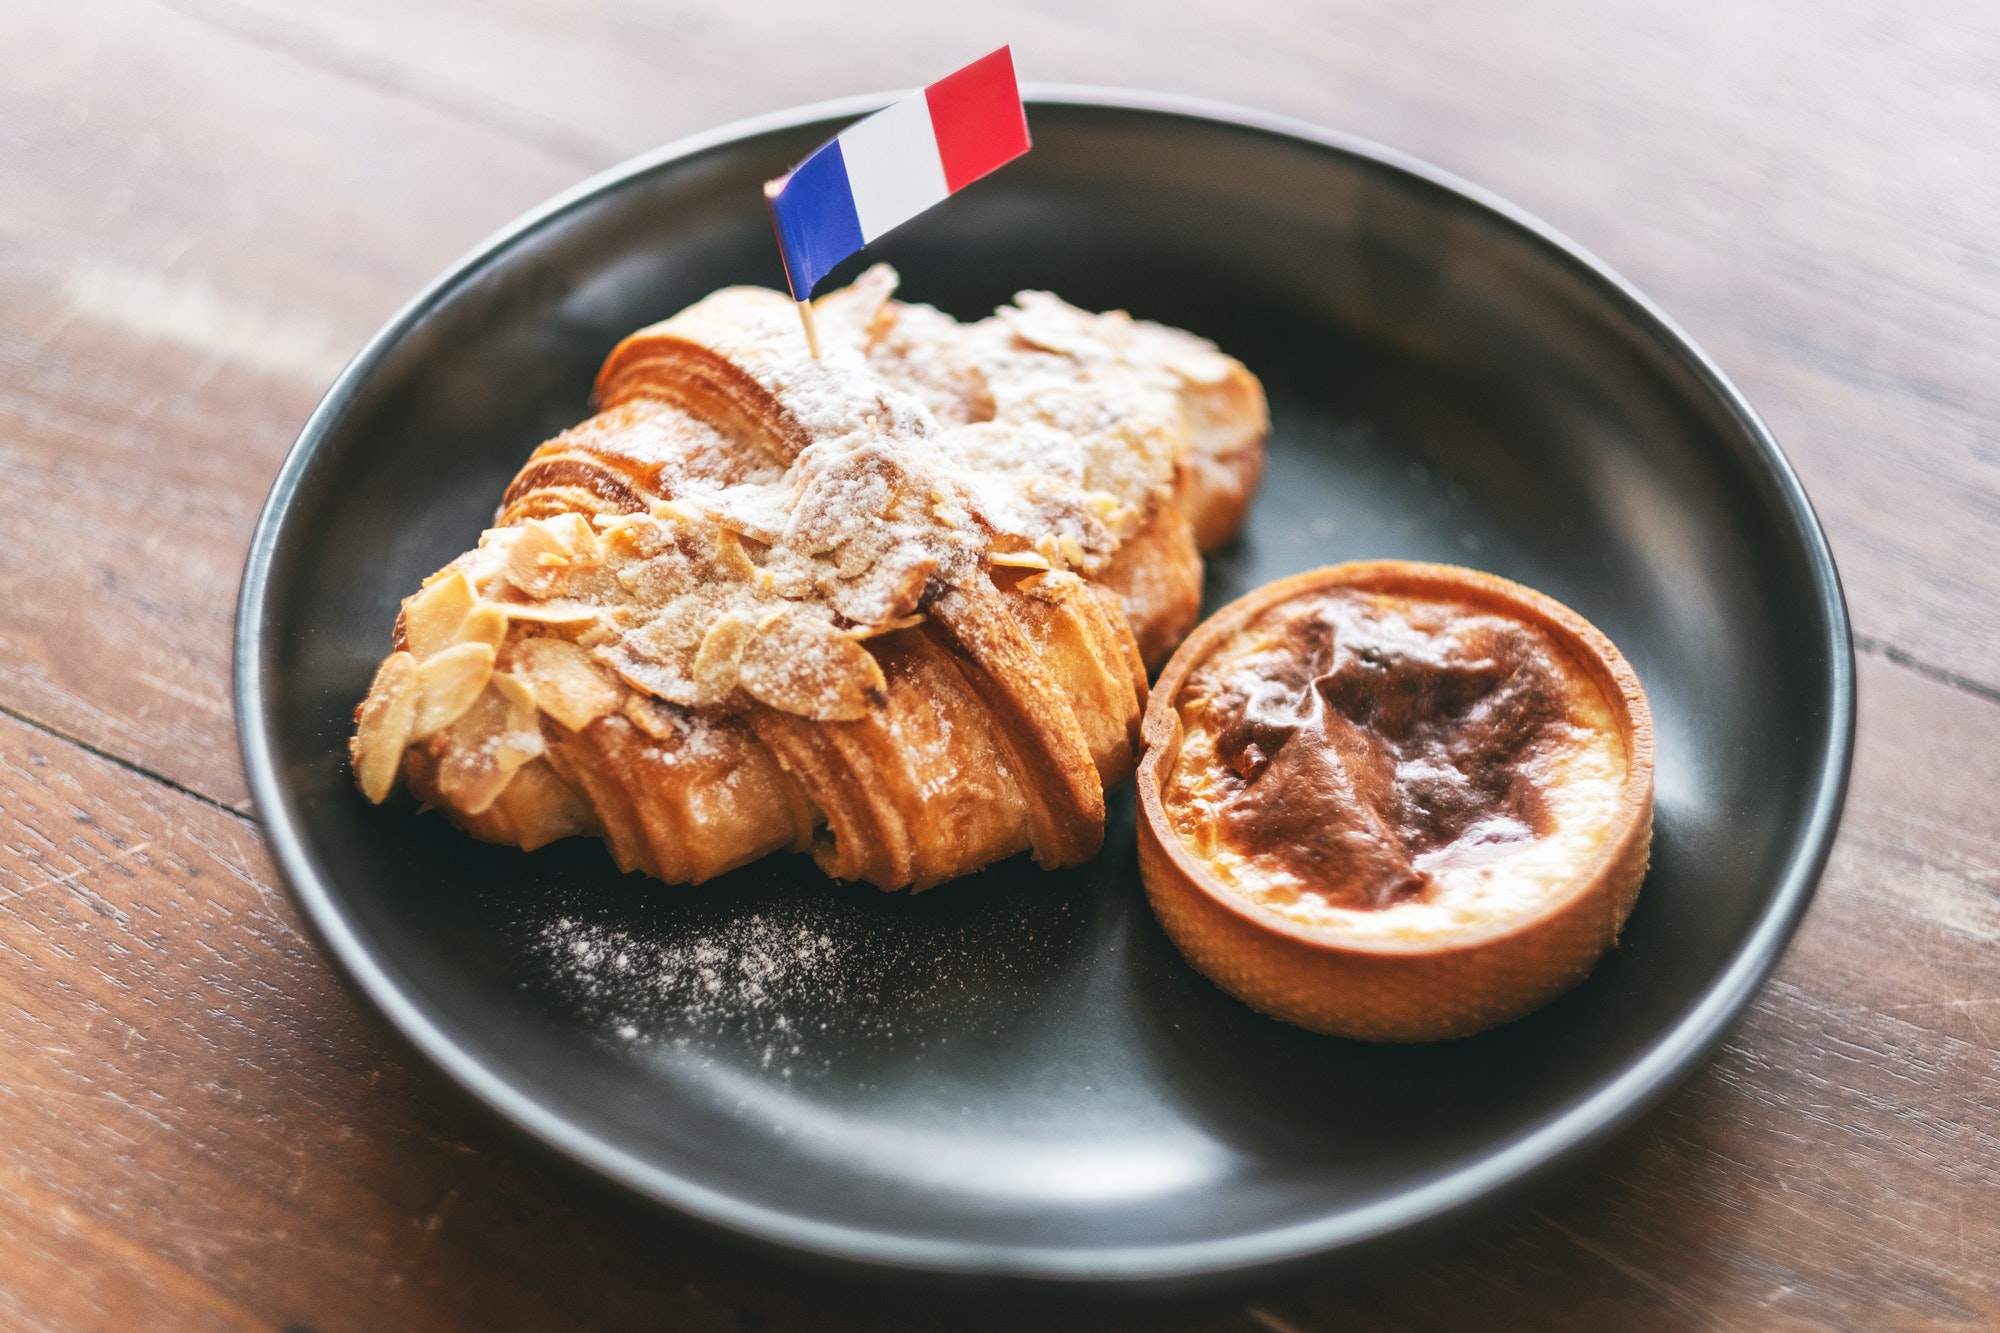 A piece of croissant and tart with a flag of France in a black plate on wooden table in cafe